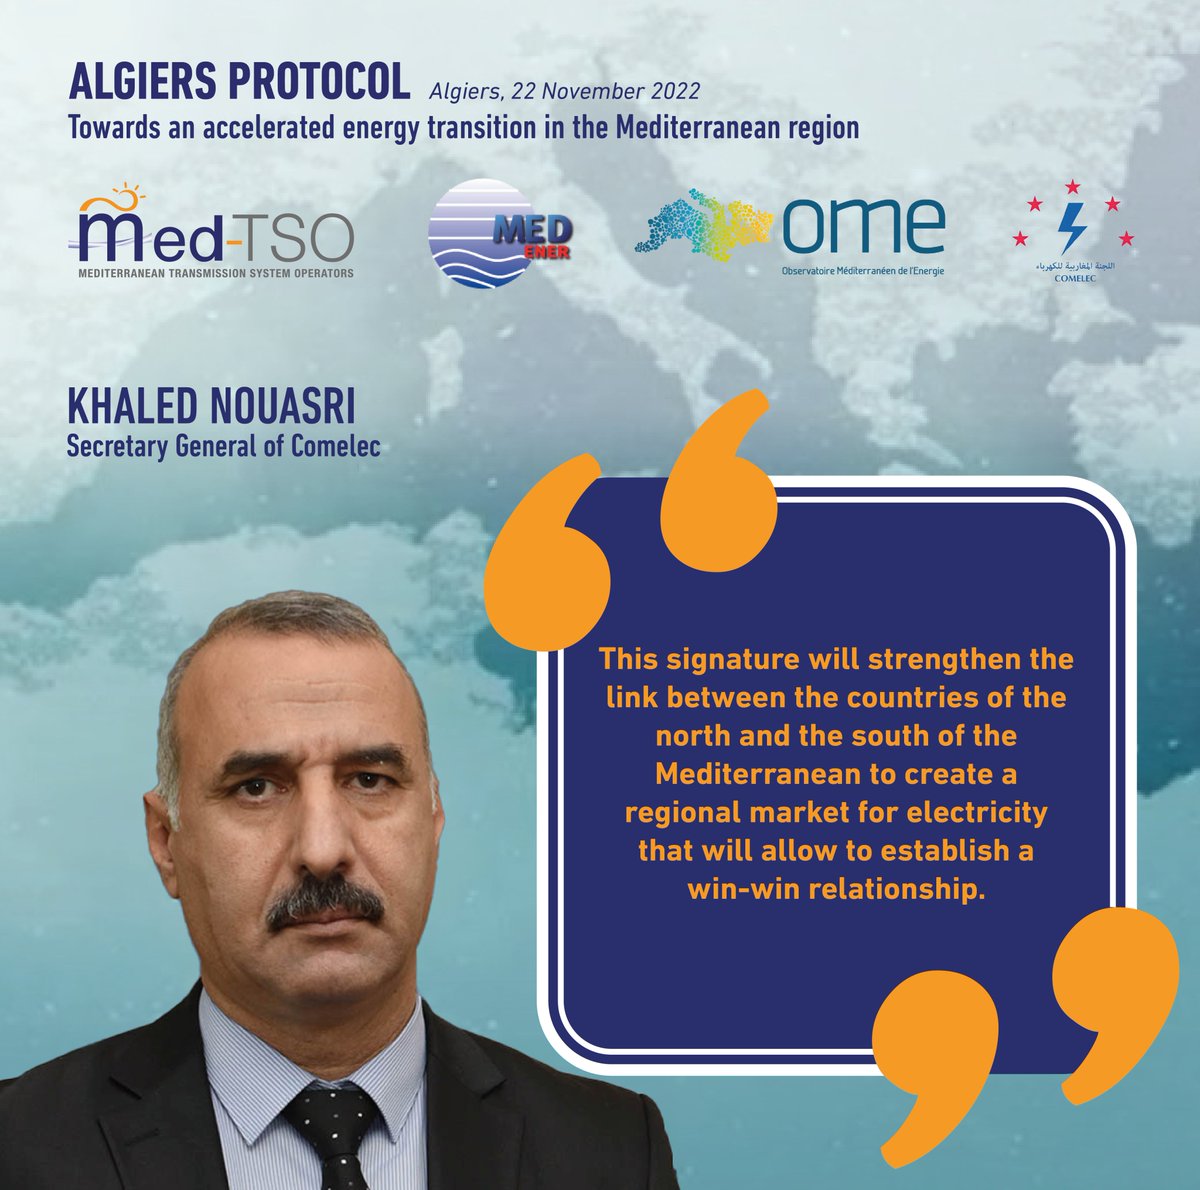 The important signature of the Algiers Protocol with #COMELEC @ContactMedener and @OME_cooperation will strengthen #cooperation and regional #energy integration in the Mediterranean.

#10YearsOfMedTSO #Mediterraneanenergy #energytransition